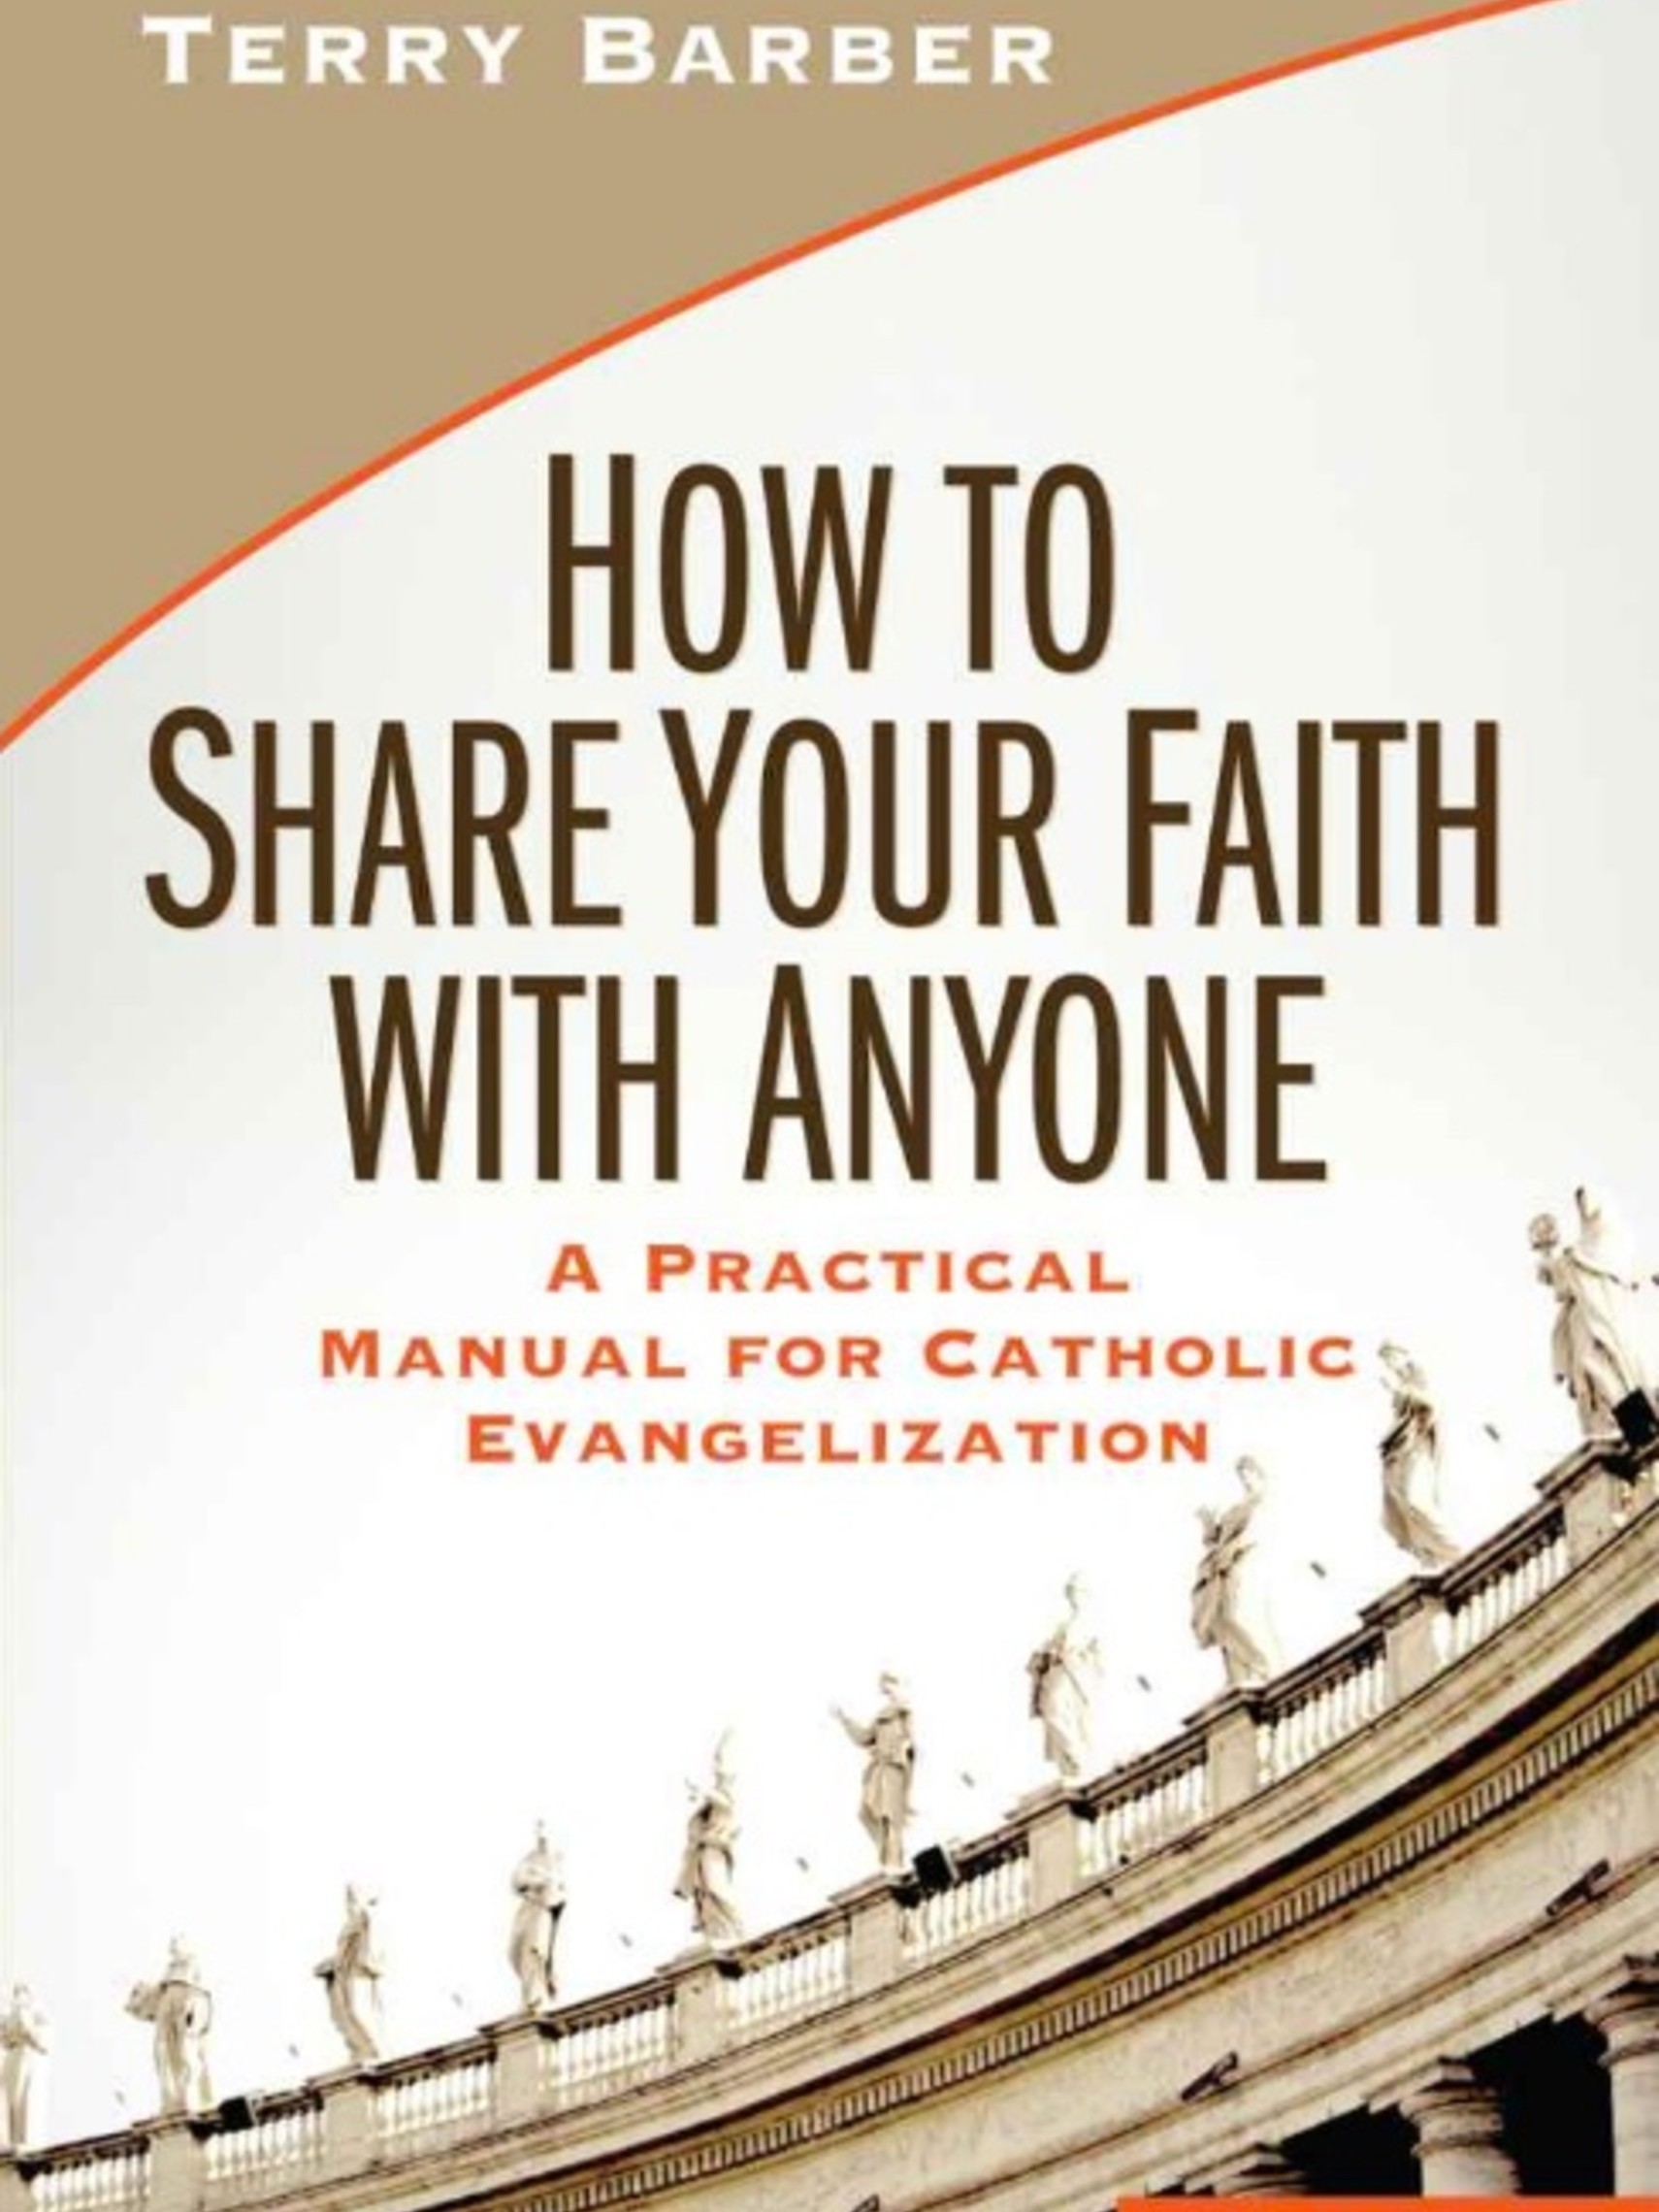 How to Share Your Faith with Anyone